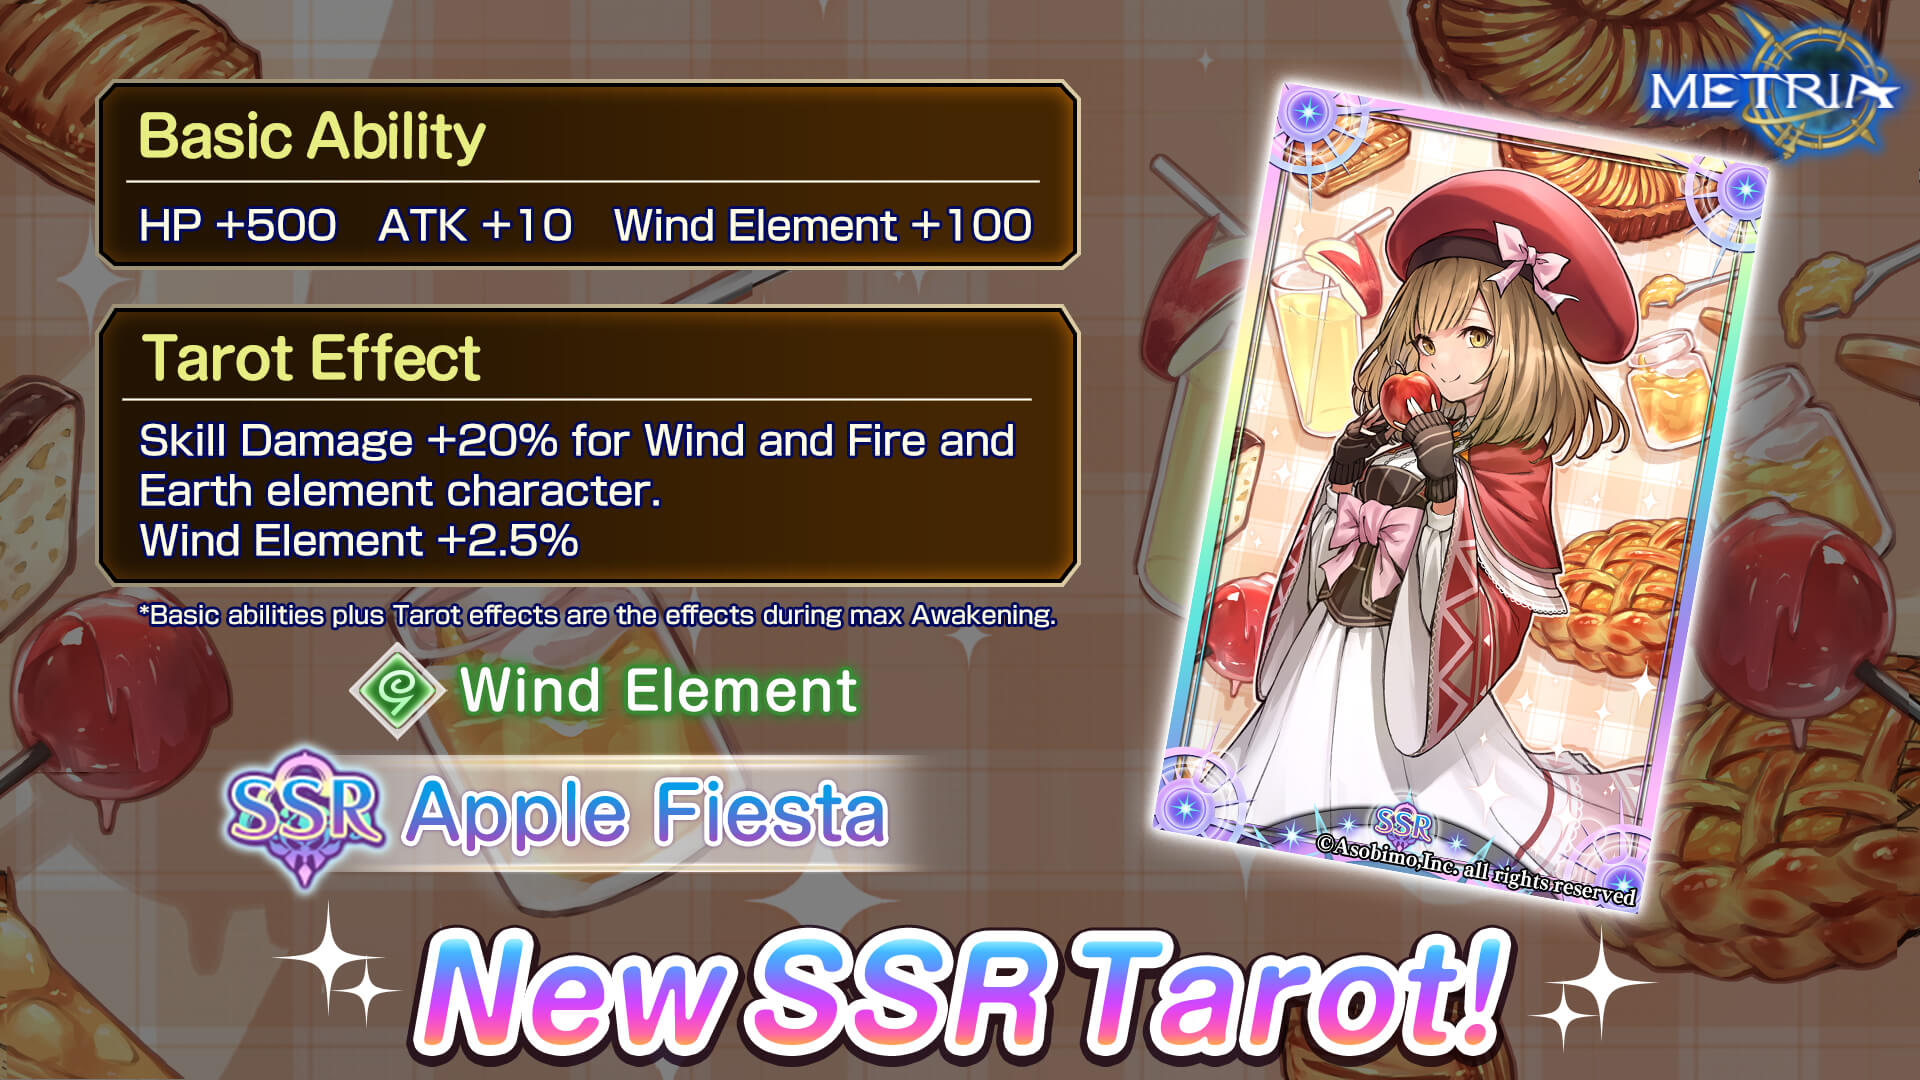 Wind Element New SSR Tarot: "Apple Fiesta" Available for Purchase!